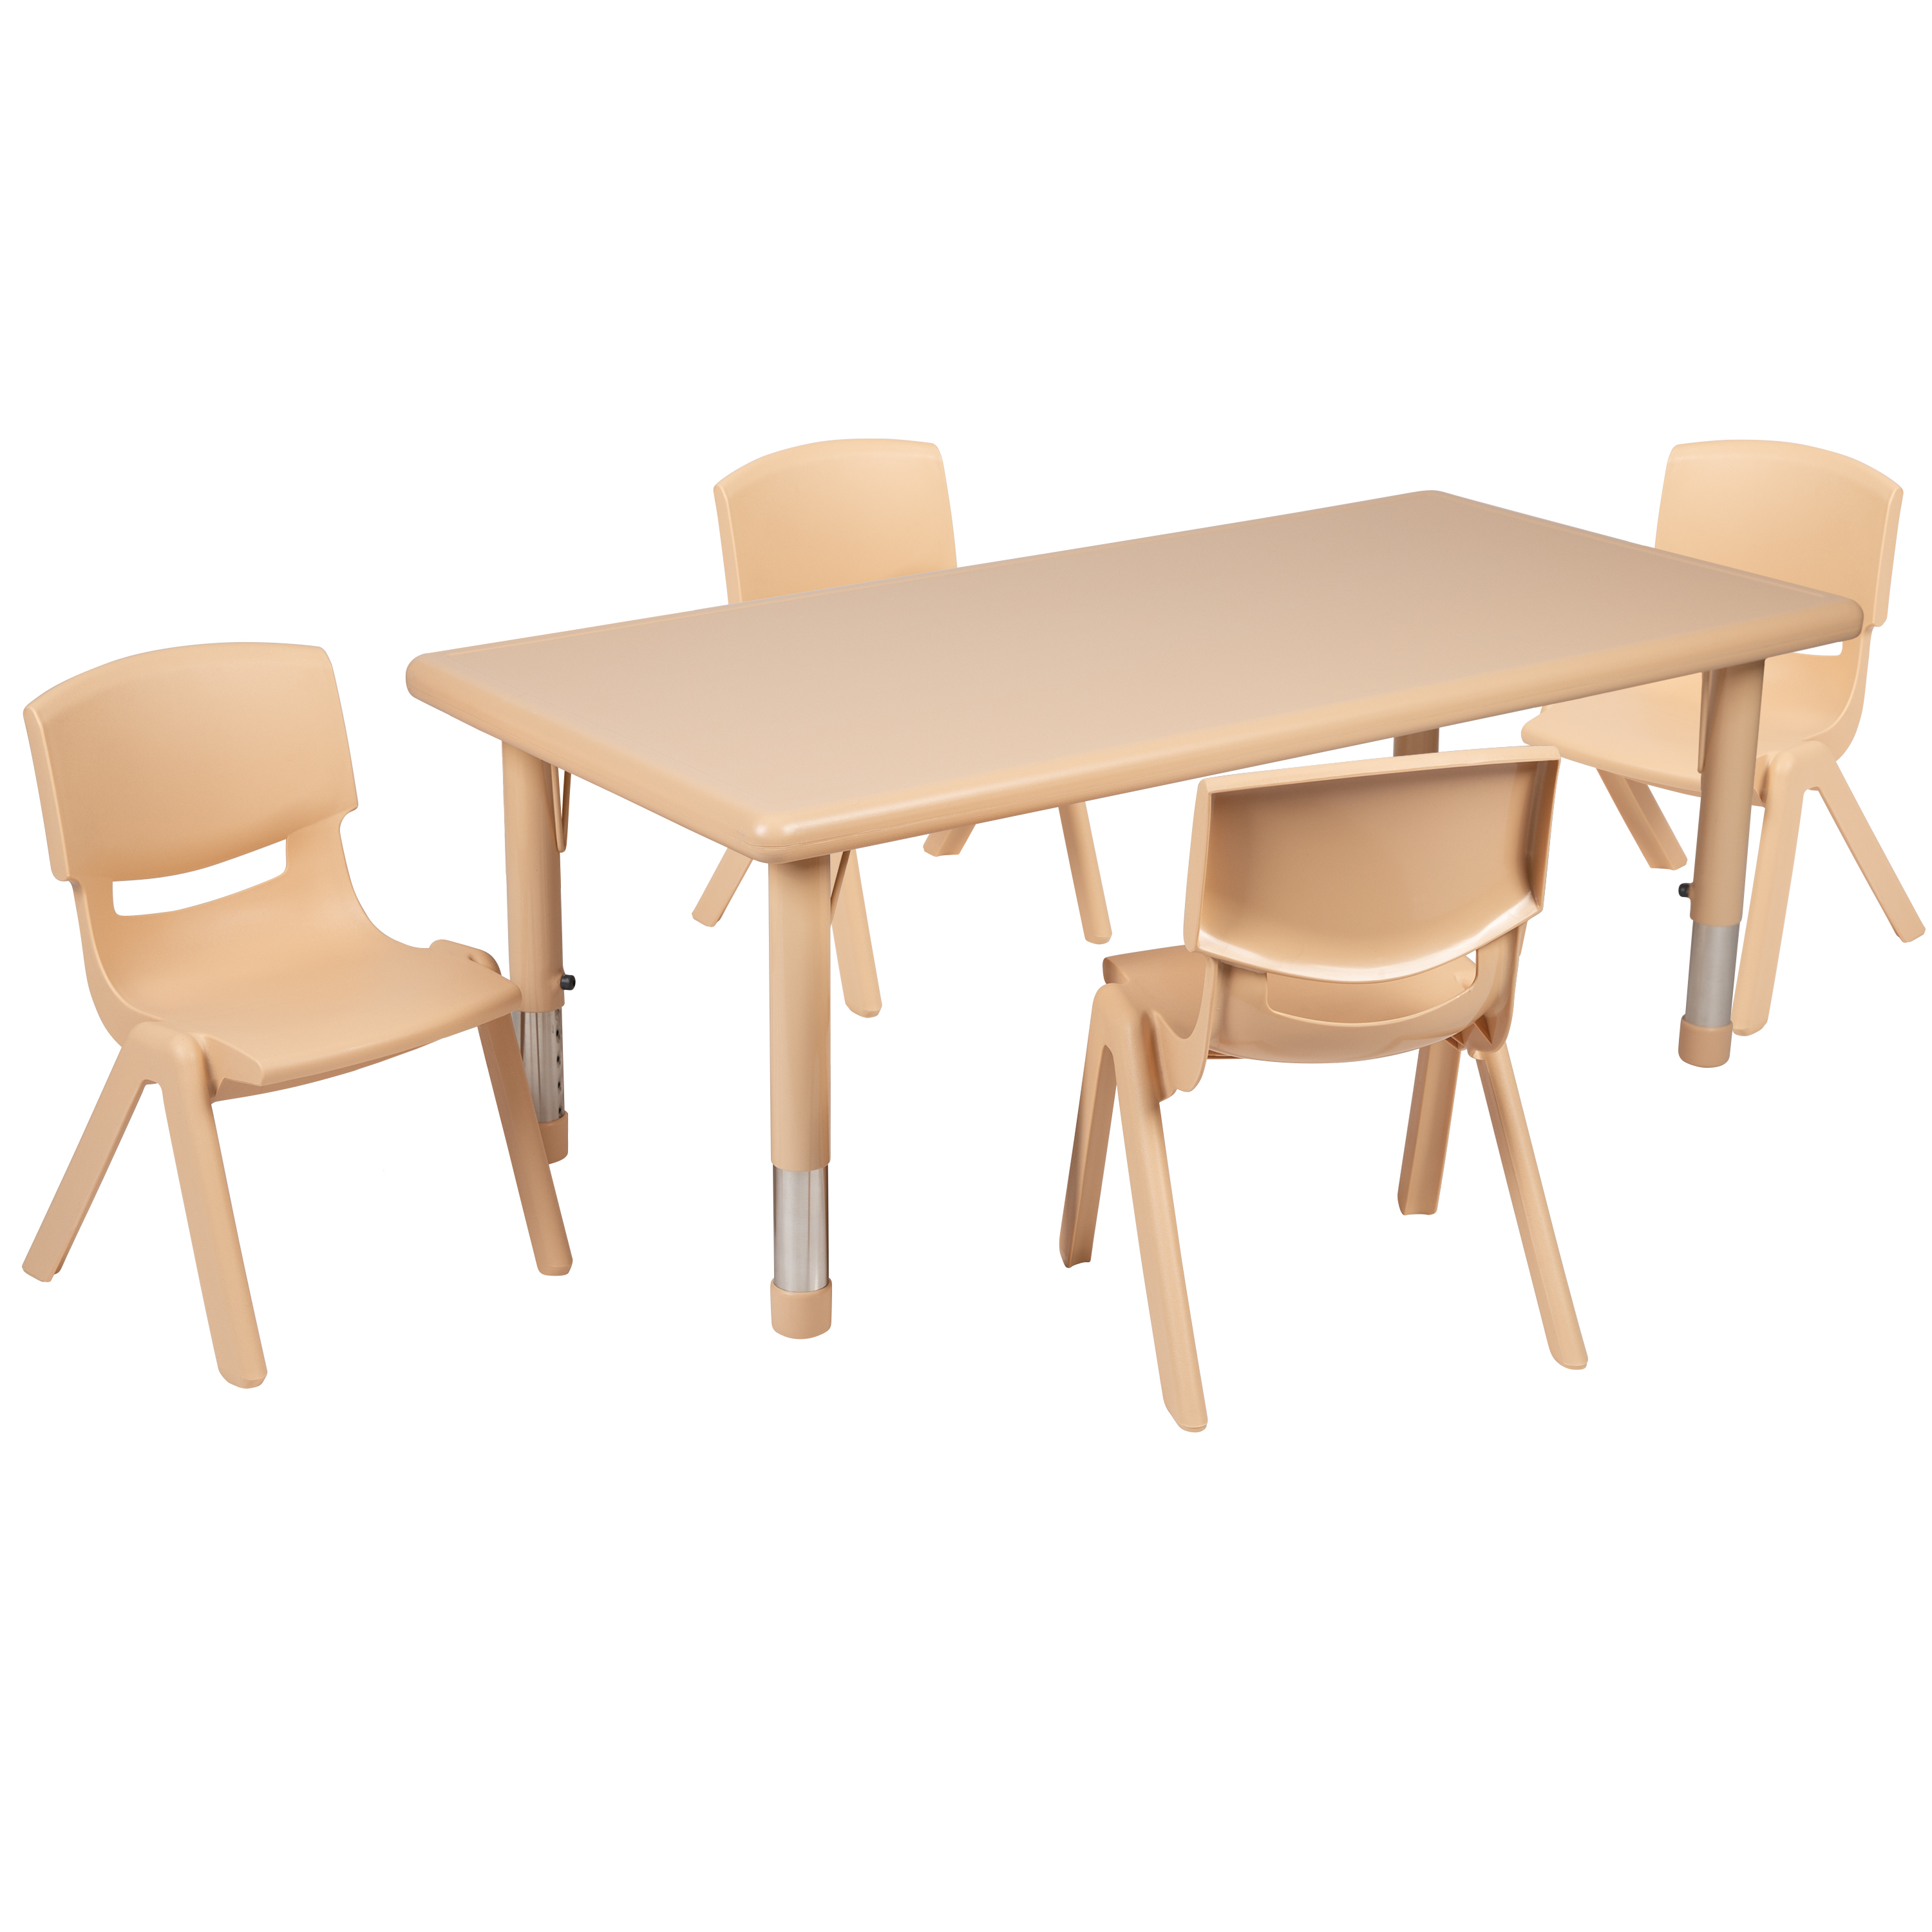 Flash Furniture YU-YCX-0013-2-RECT-TBL-NAT-R-GG 24"W x 48"L Rectangular Natural Plastic Height Adjustable Activity Table with 4 Chairs